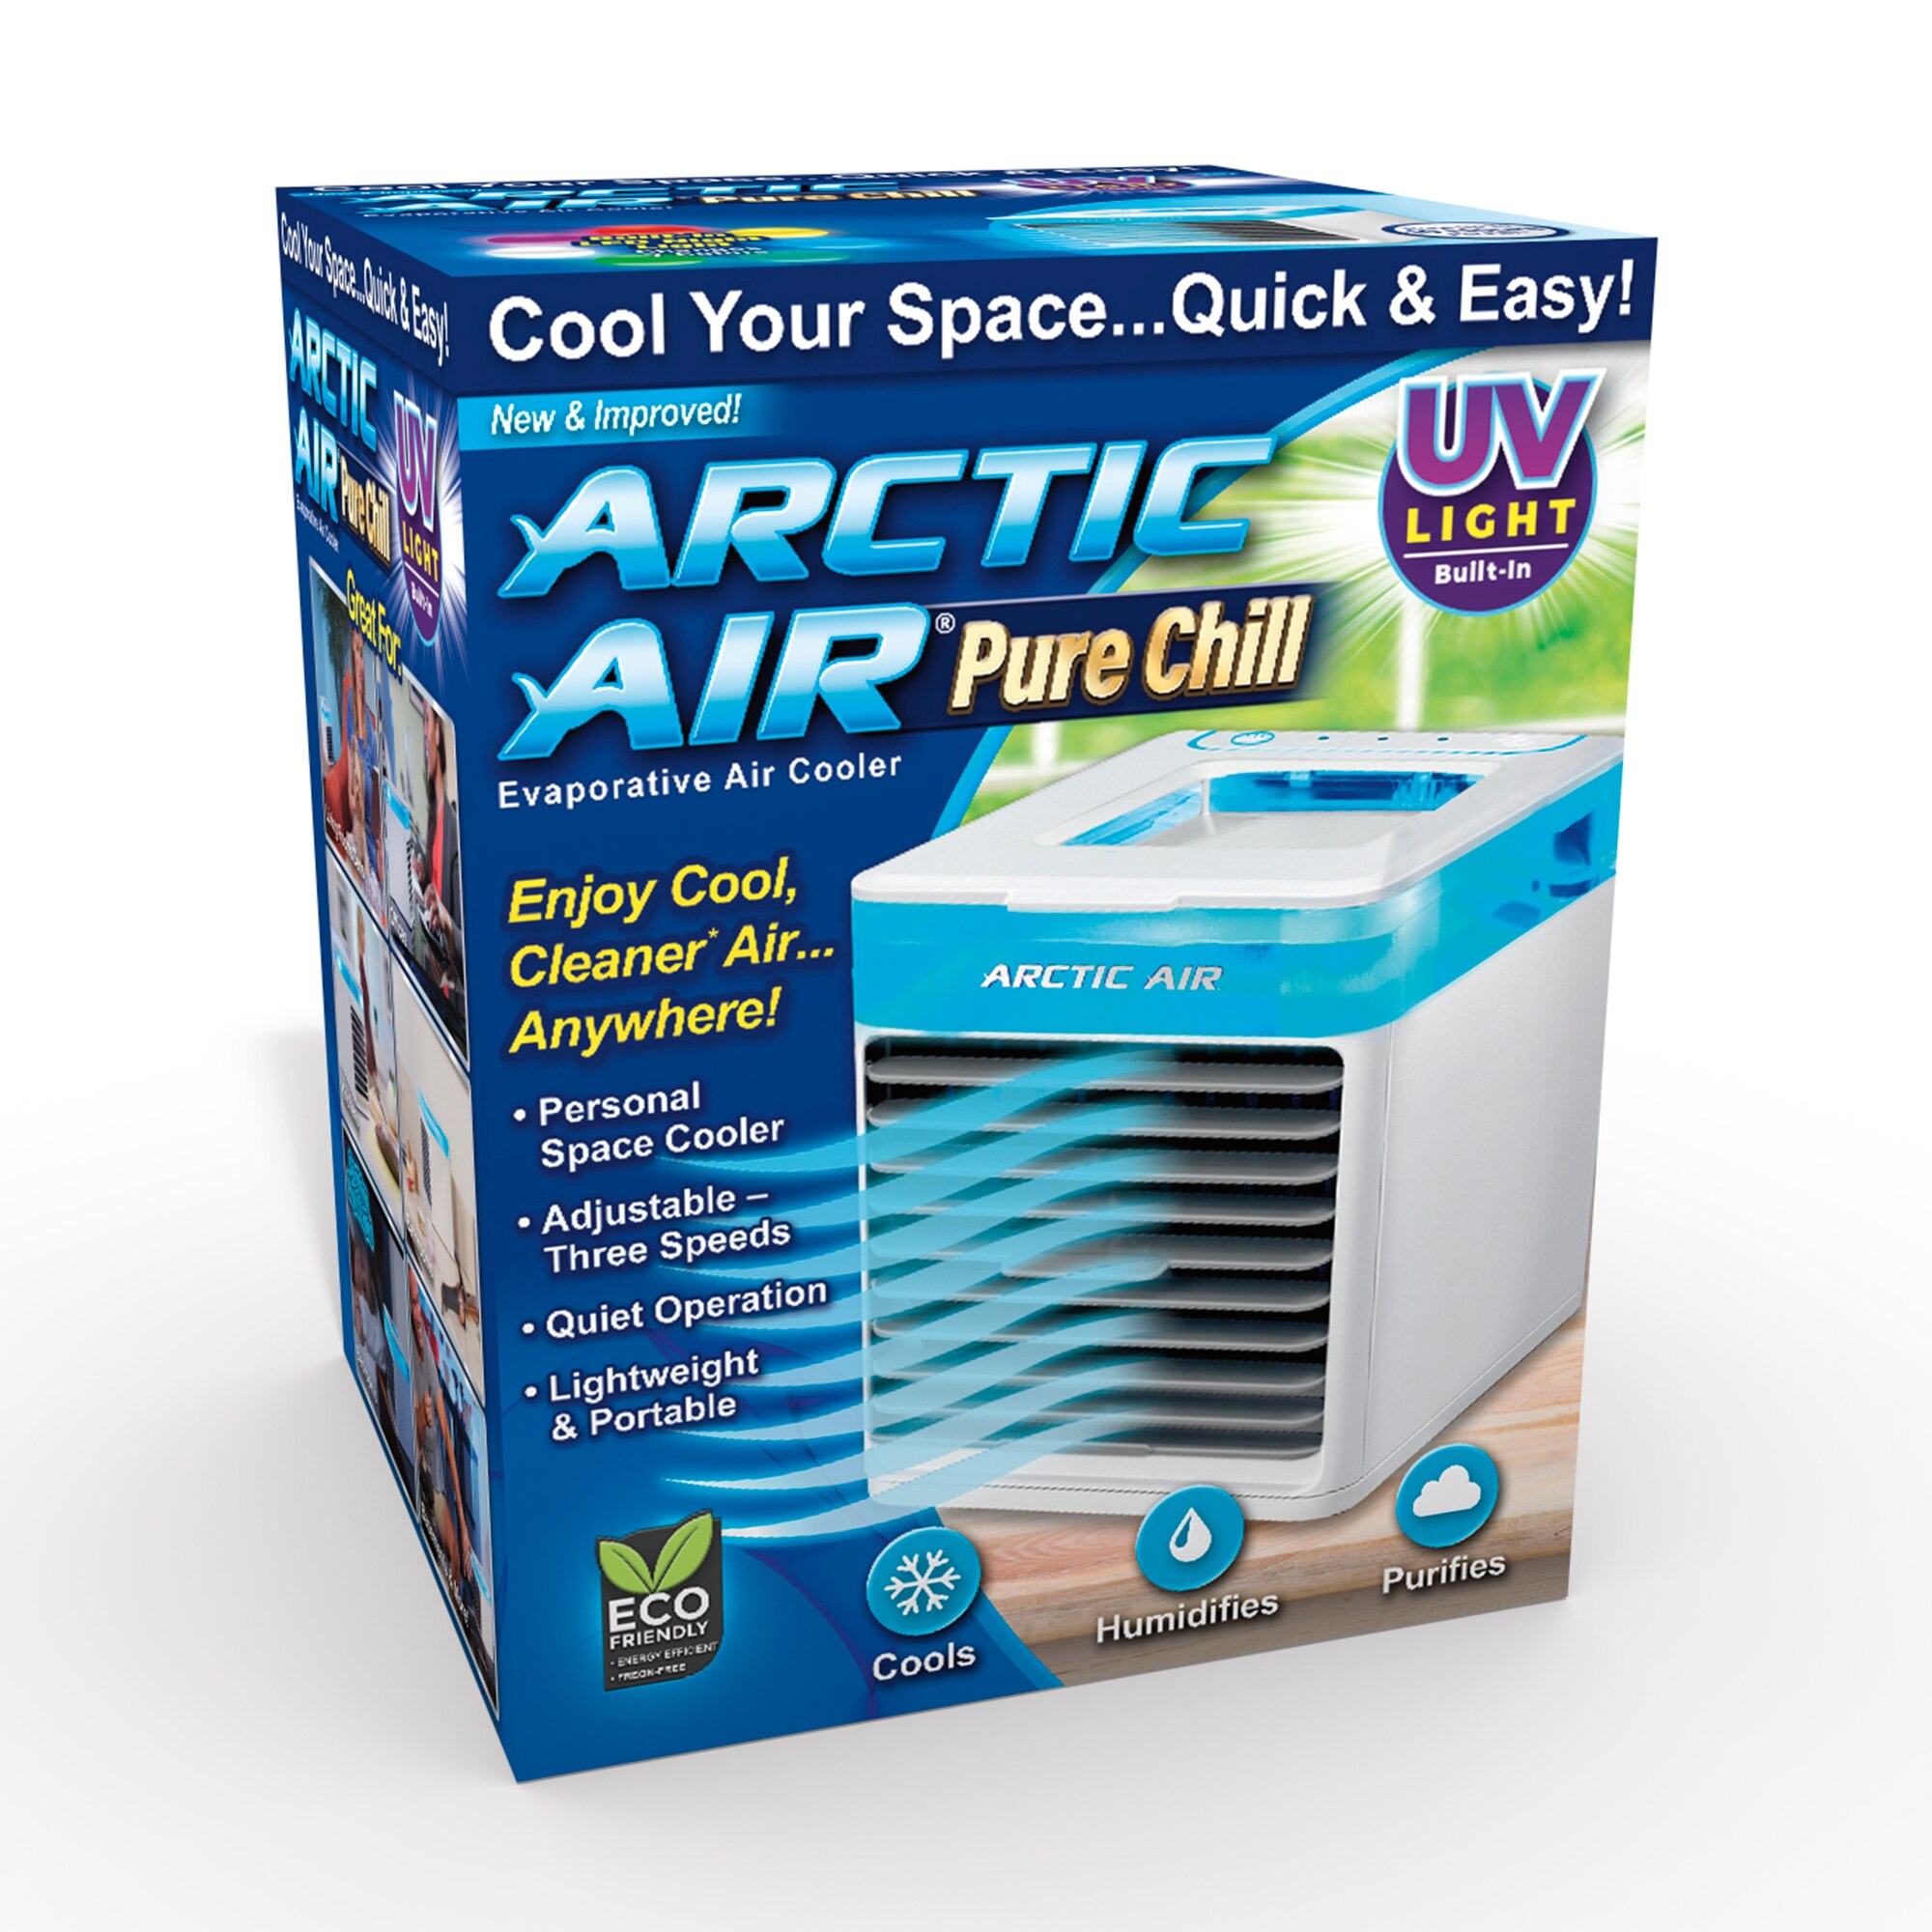 Frustrating degree So far Arctic Air Pure Chill Evaporative Air Cooler | Pick Up In Store TODAY at CVS